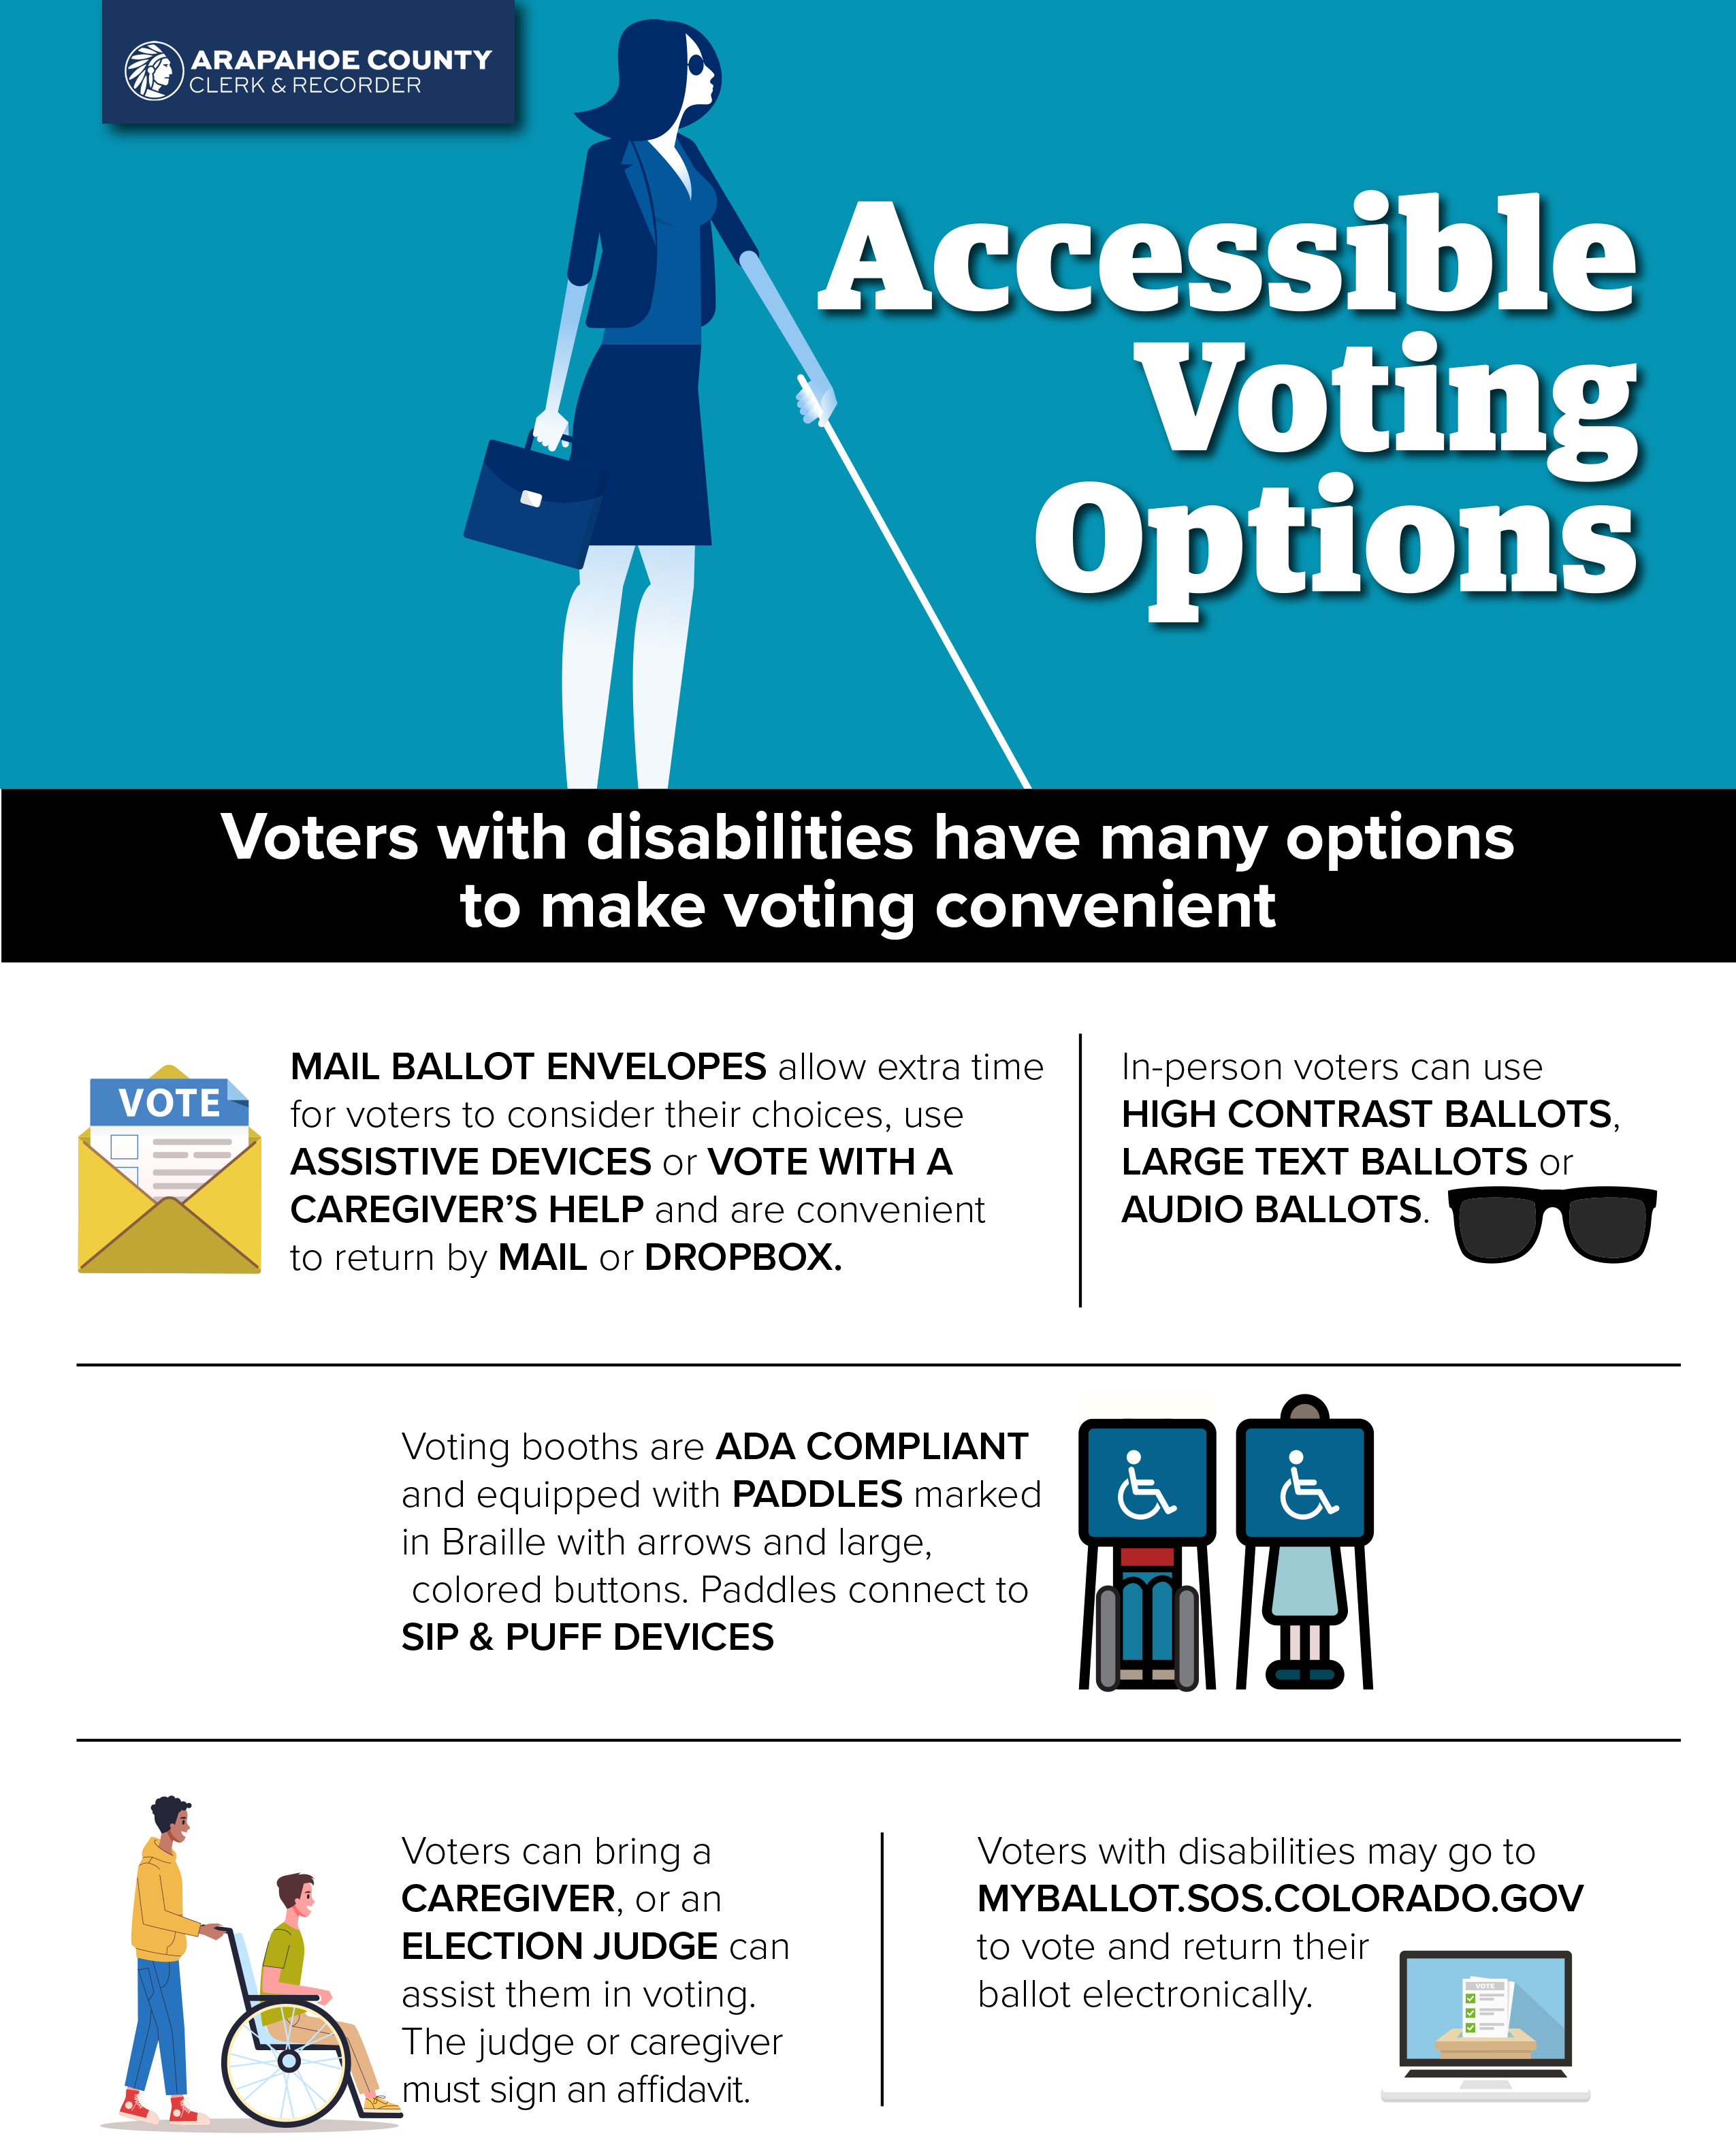 a graphic shows several voting options for voters with visual and other disabilities